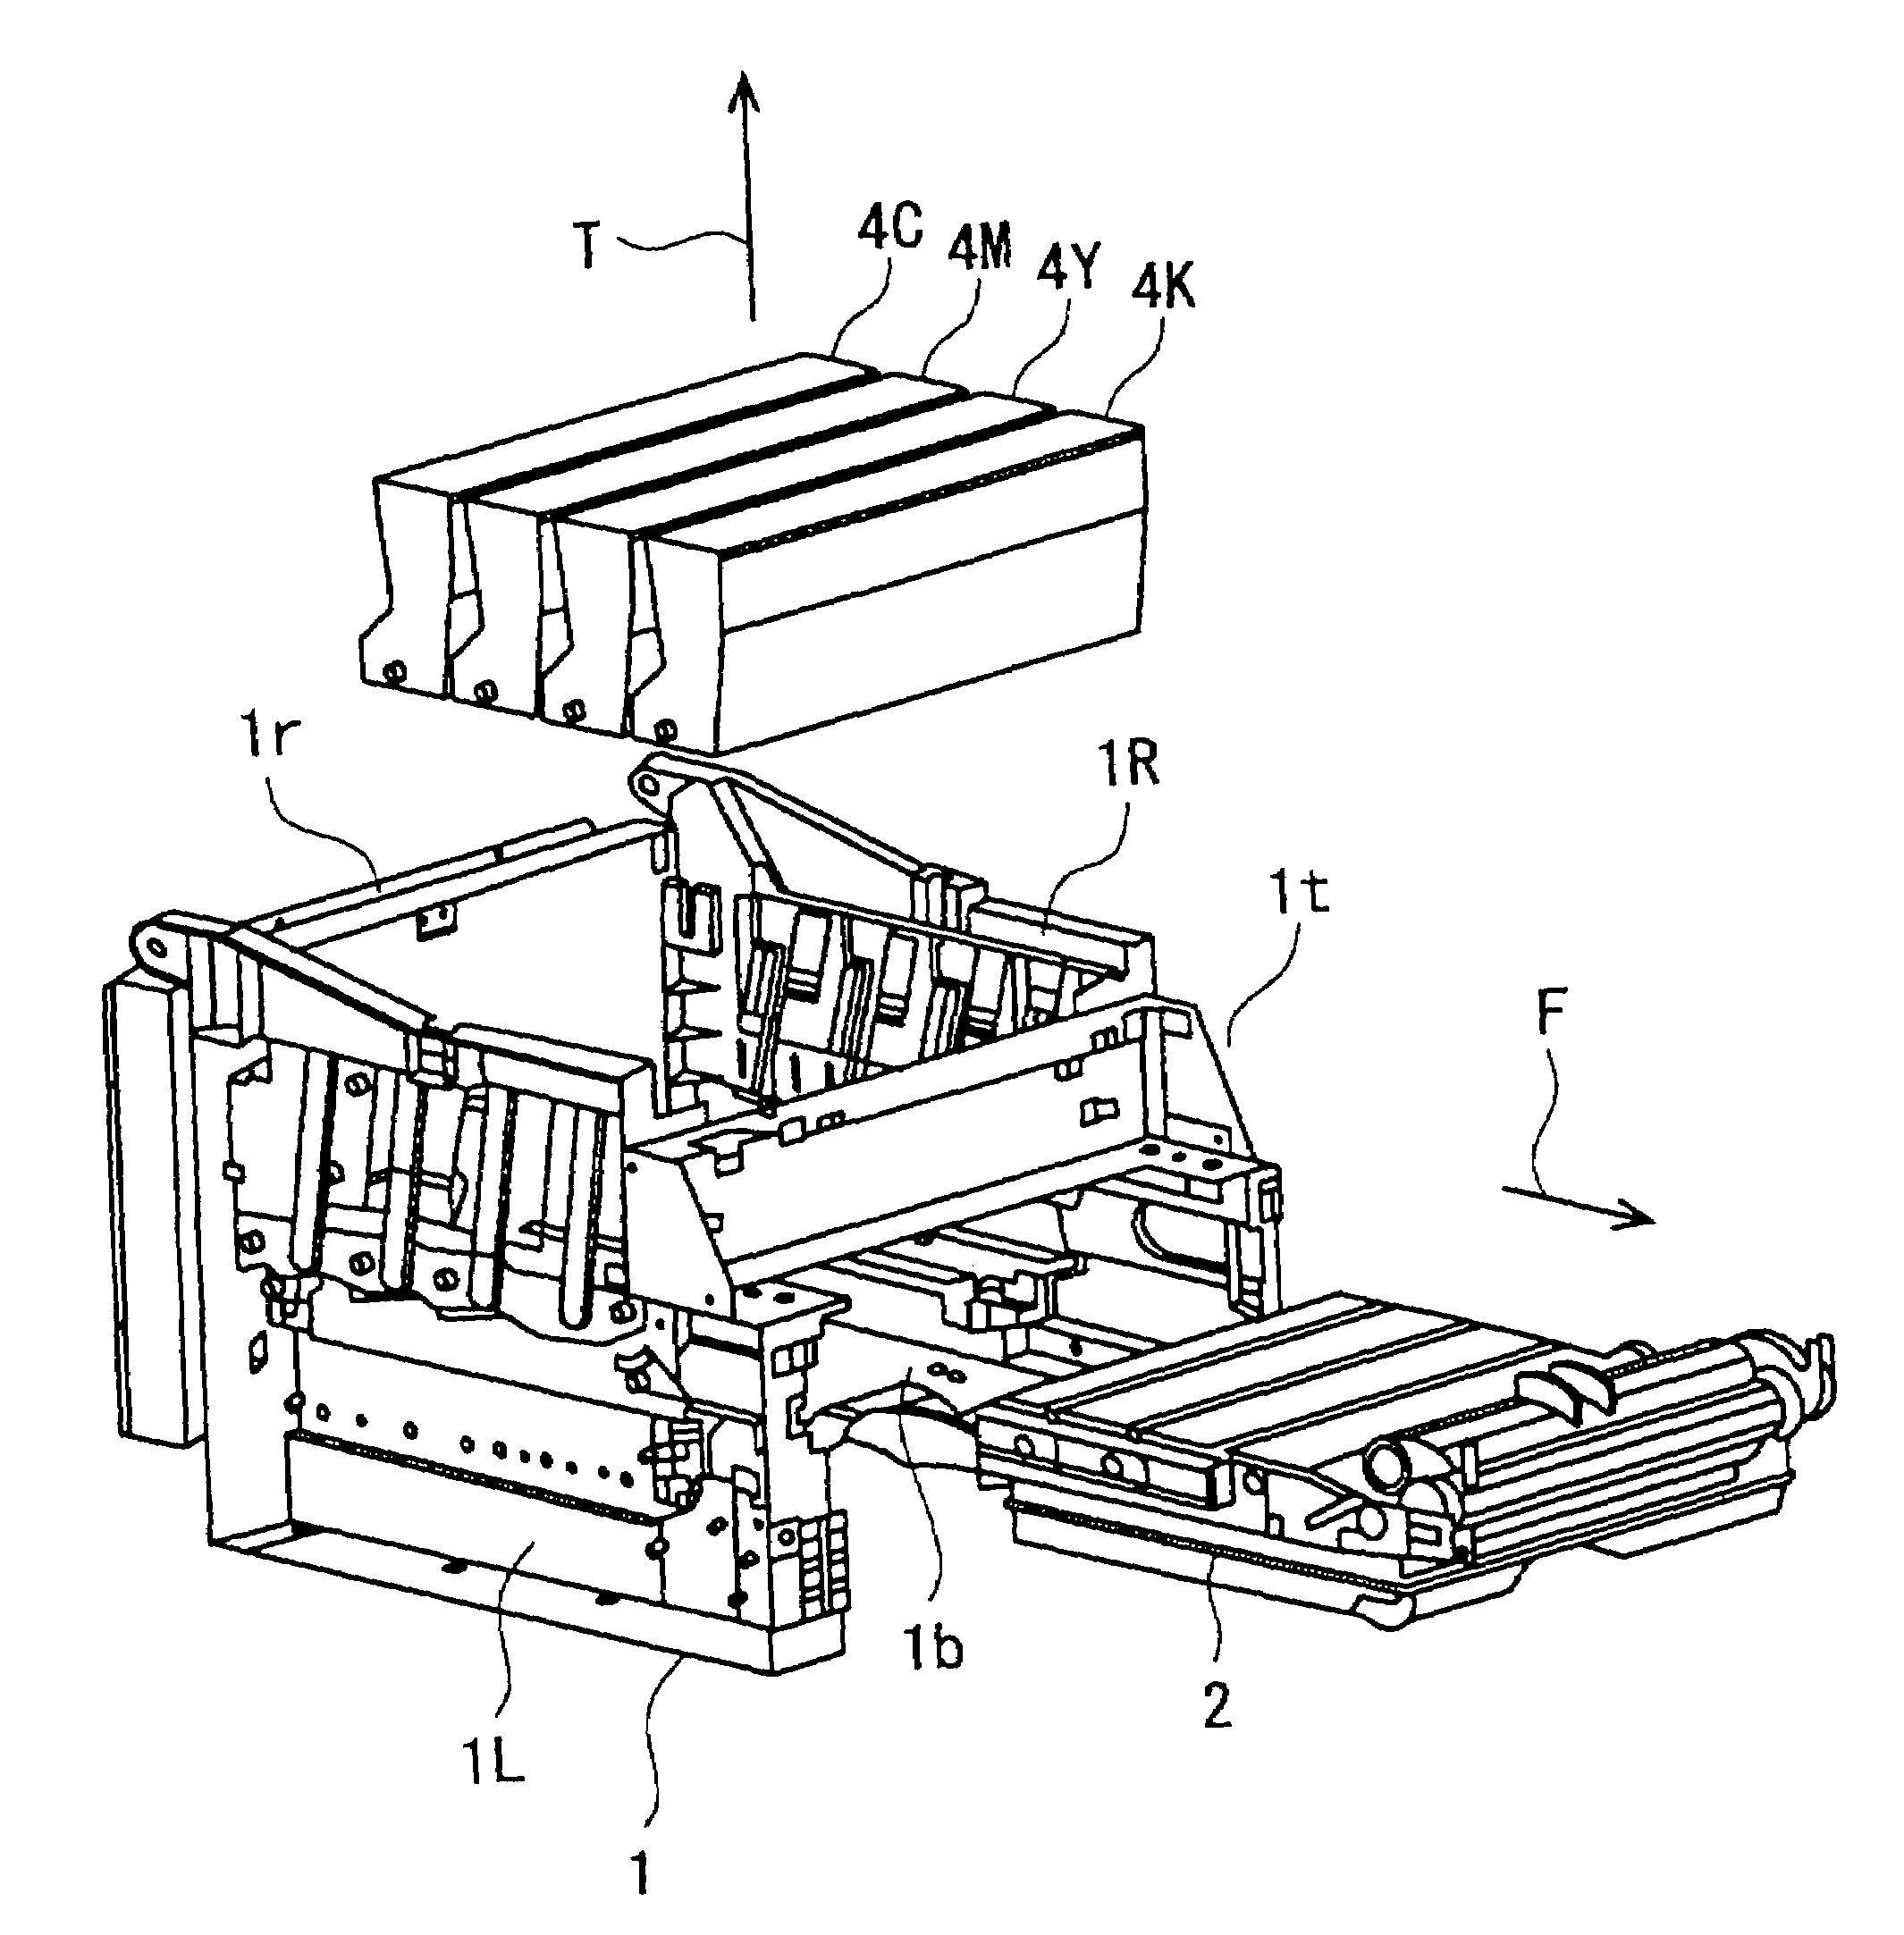 Image forming apparatus including structural frame